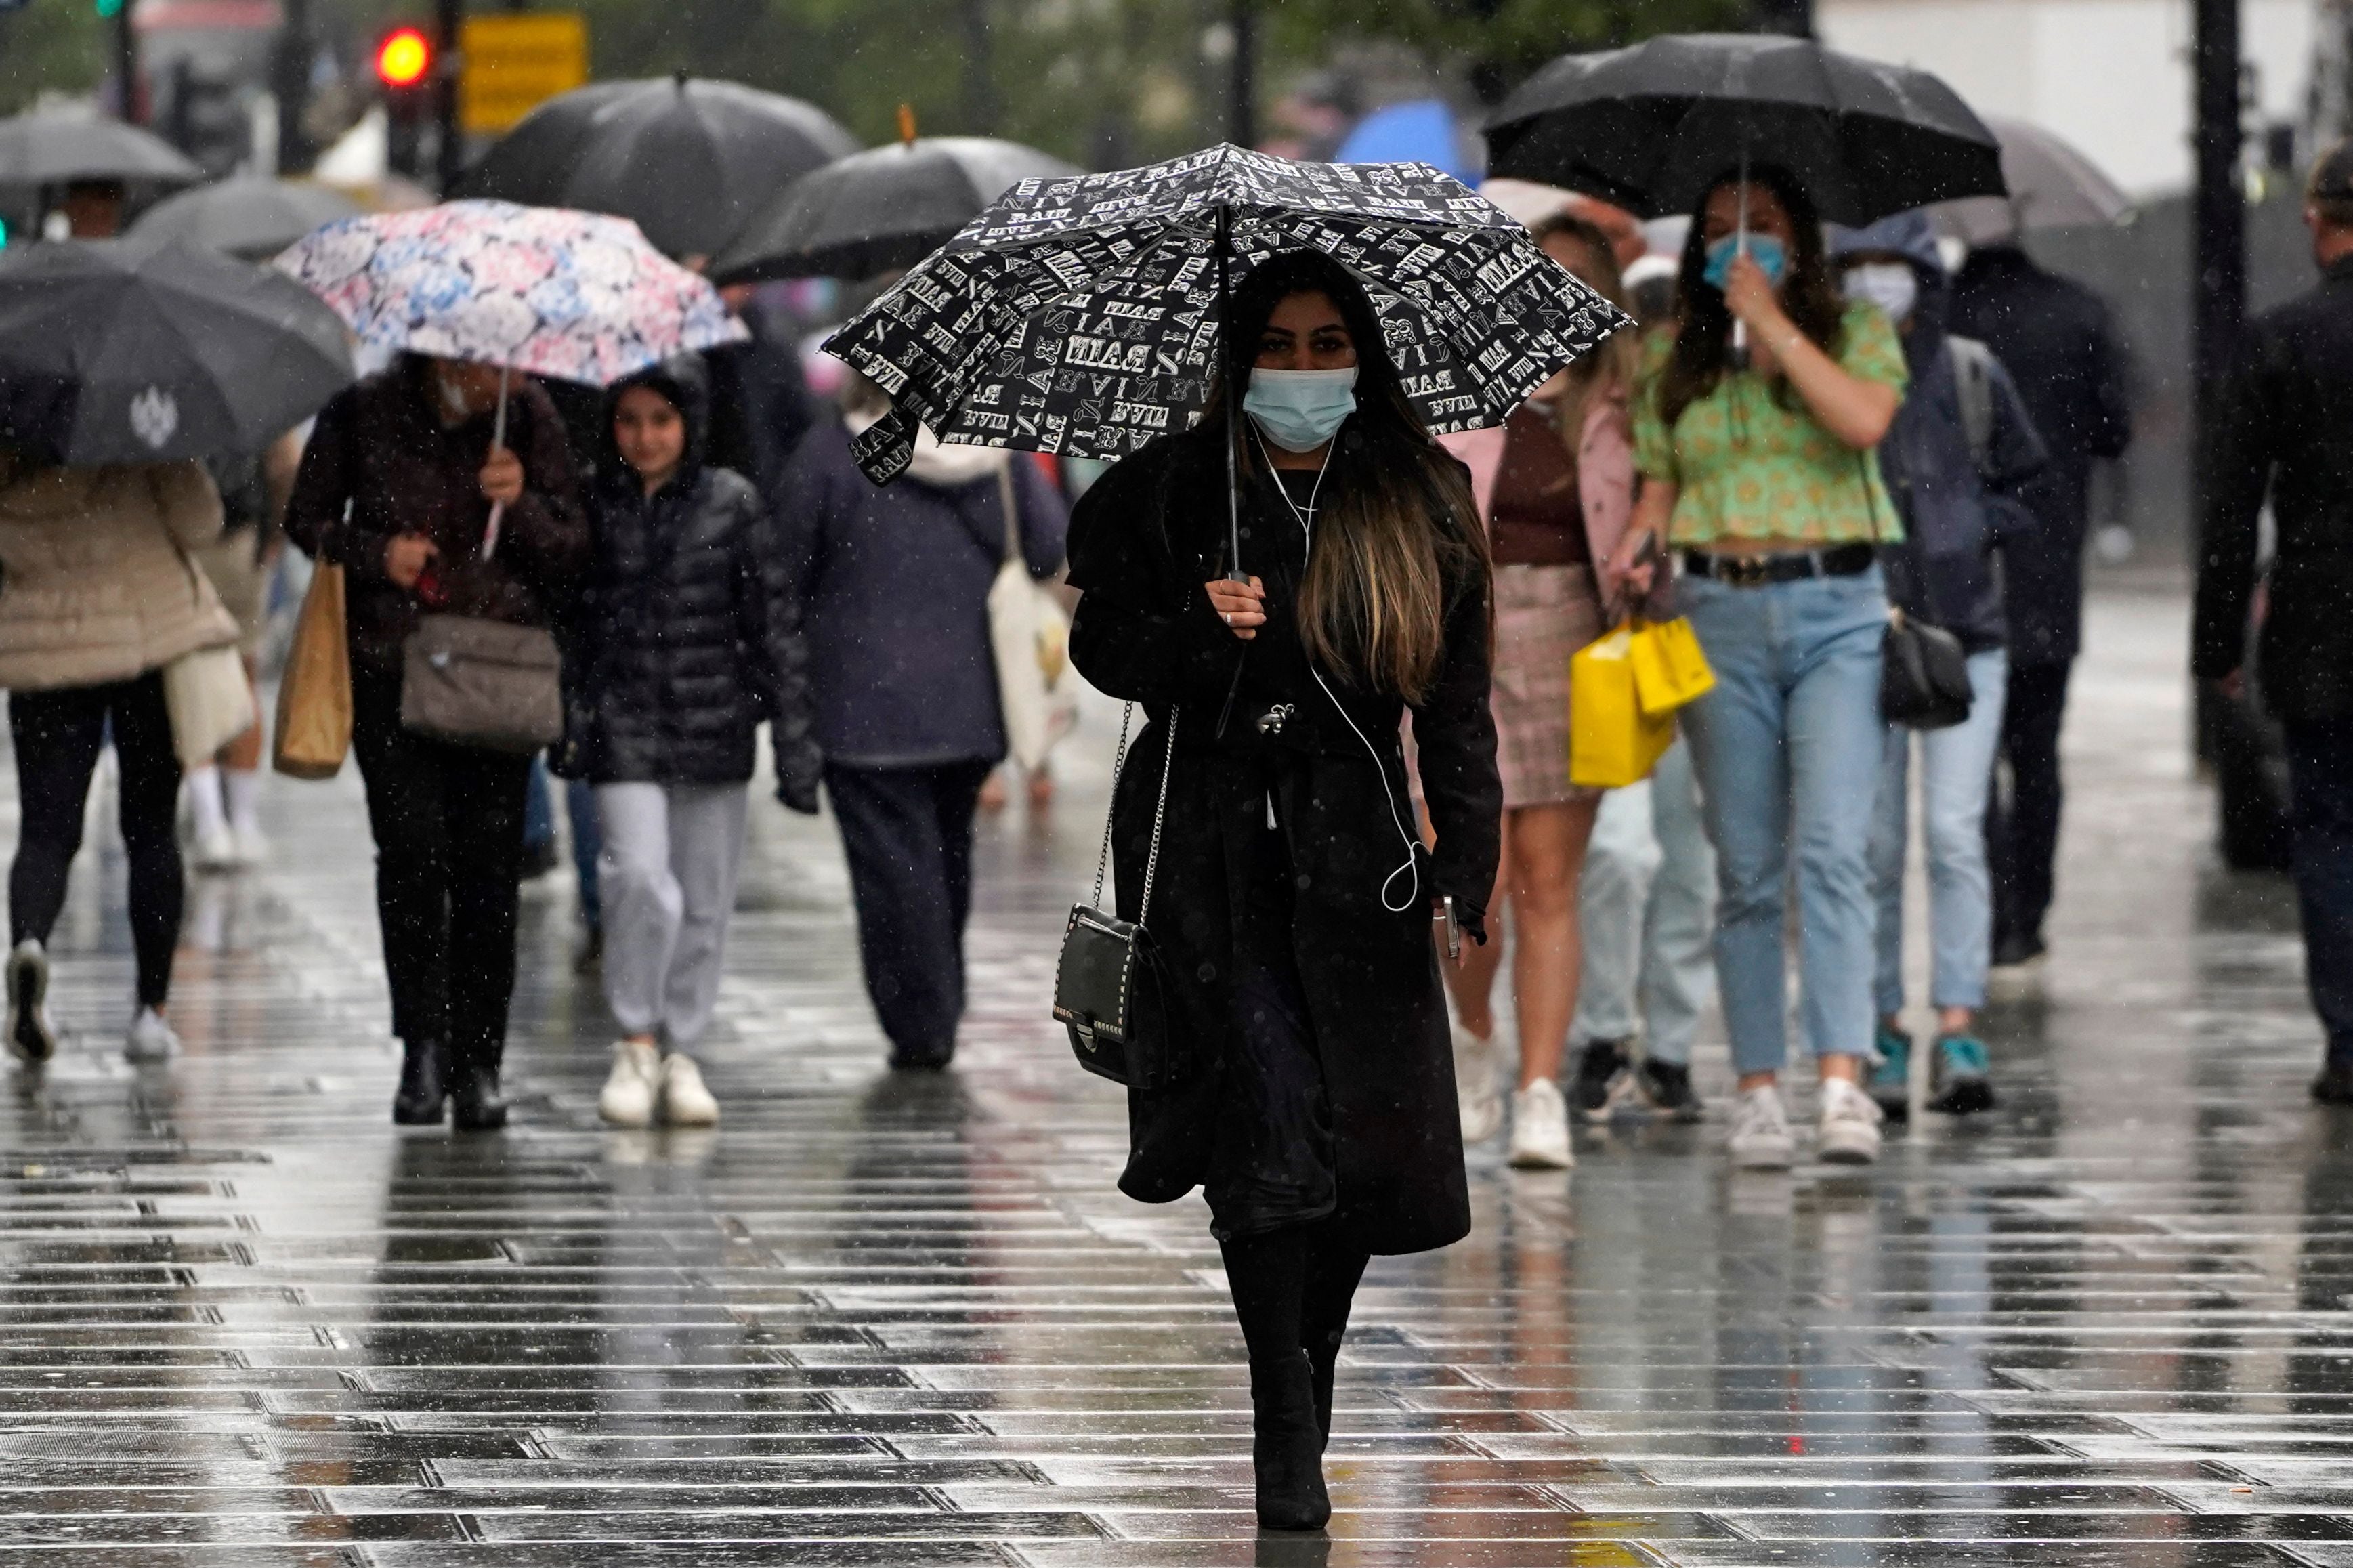 London will see more rain on Friday